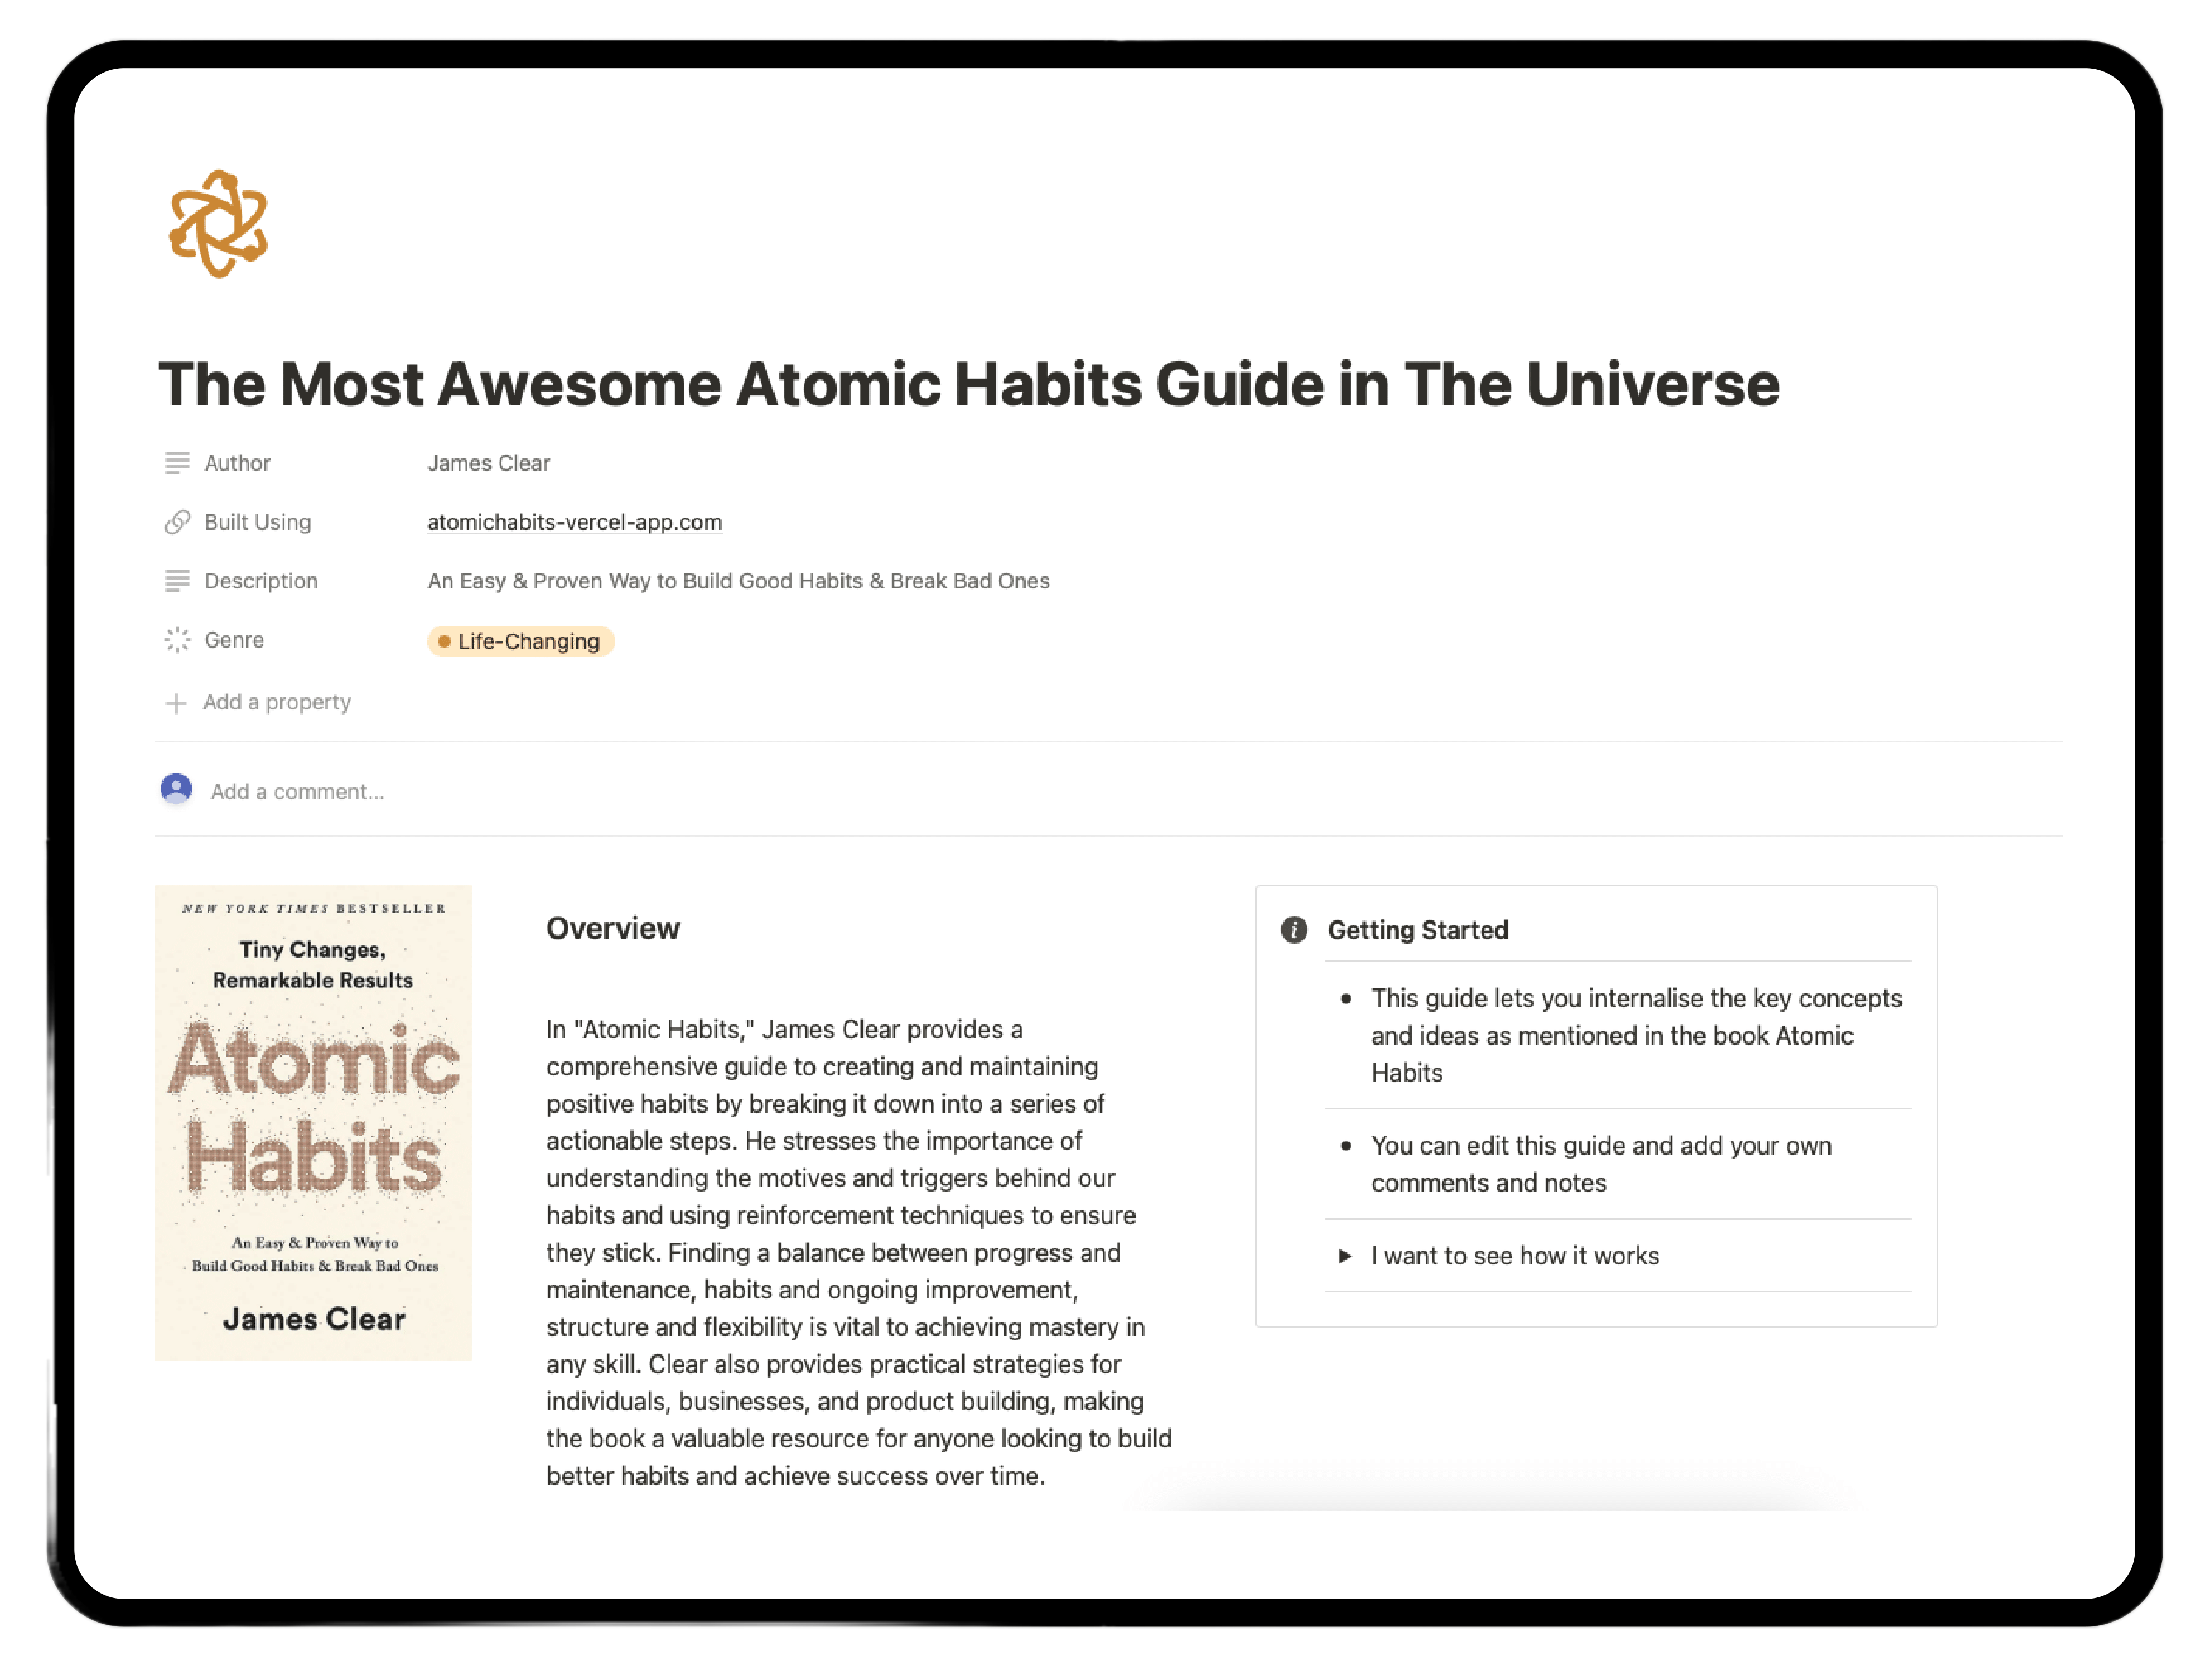 The Most Awesome Atomic Habits Guide in the Universe